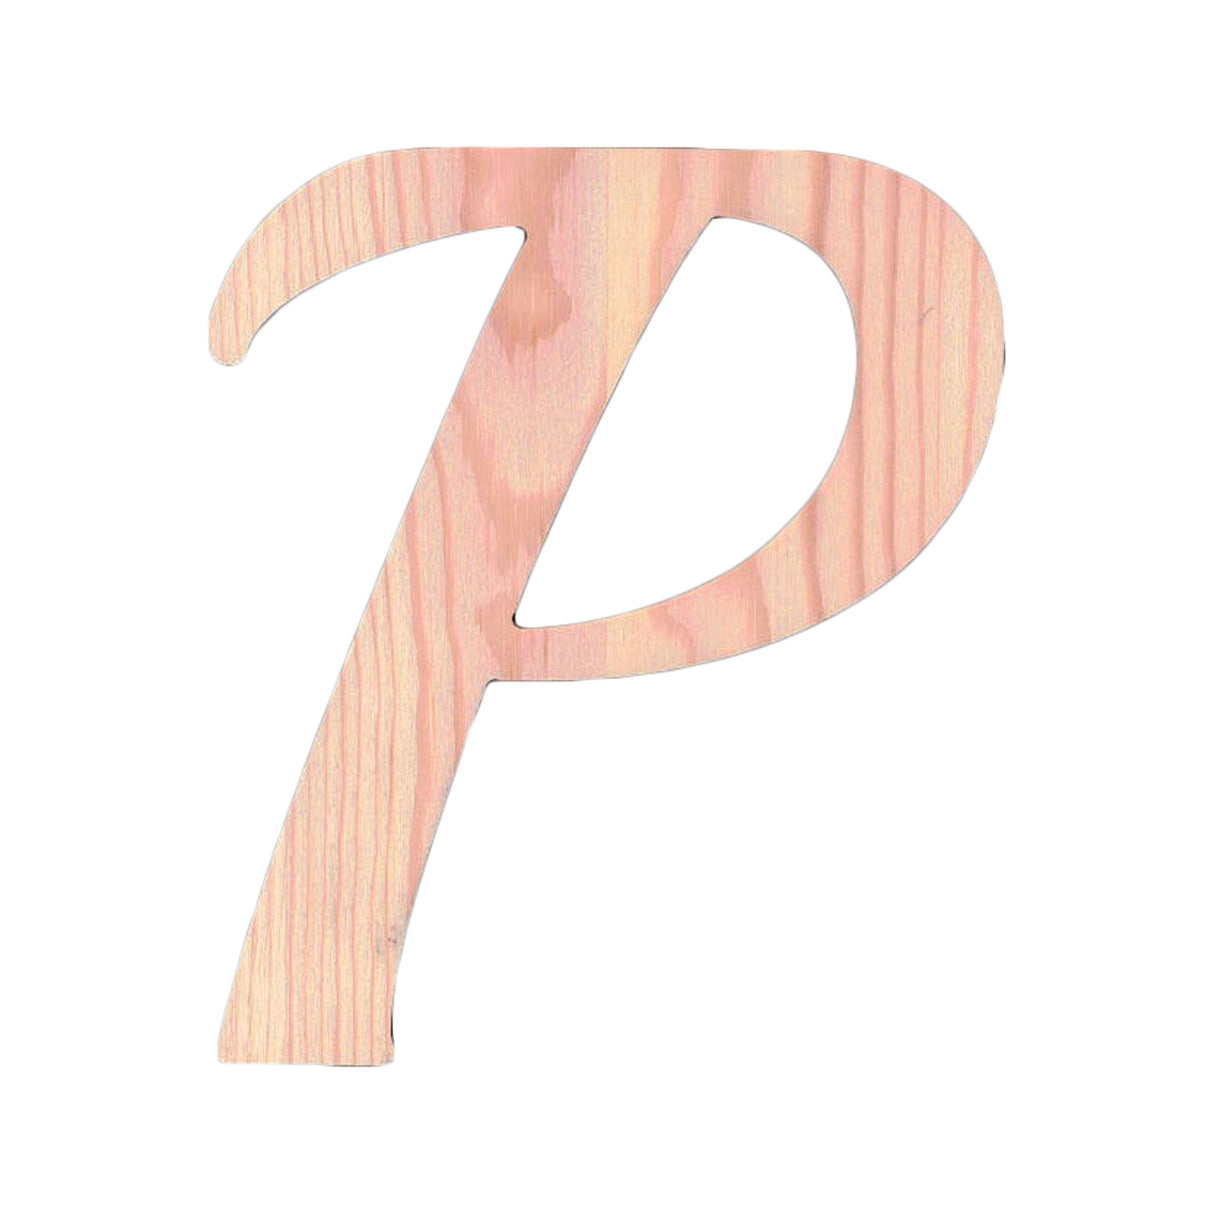 Wood Unfinished Wooden Playball Italic Letter P (6.25 Inches) in Beige color